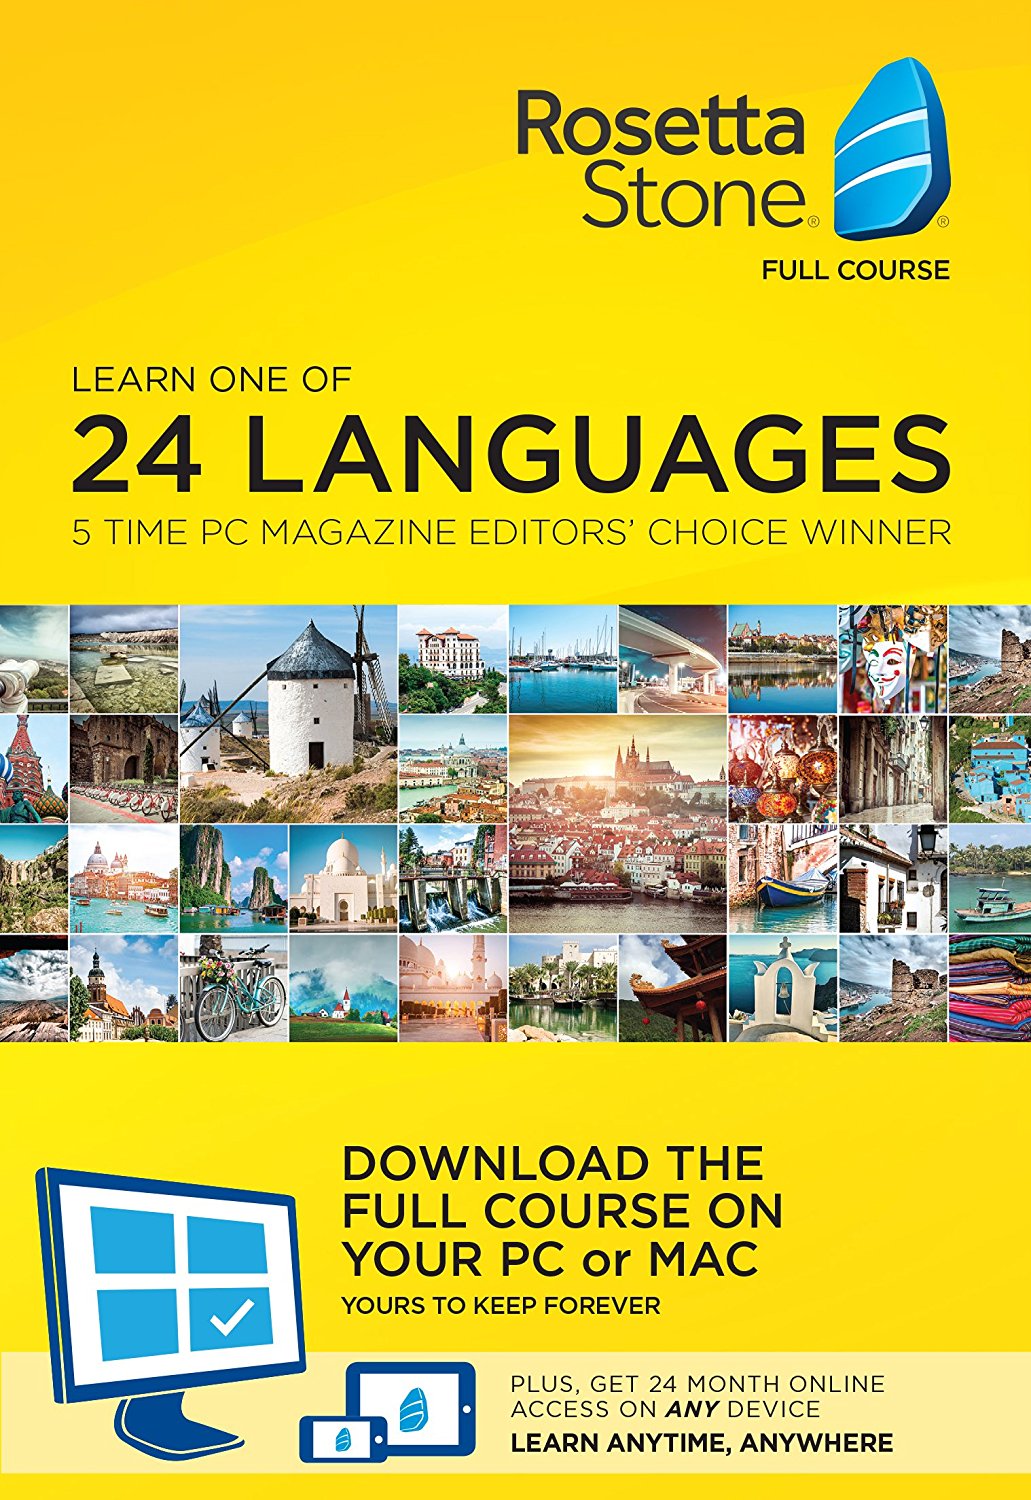 Rosetta Stone lifetime download with 24-month online access for $116.50